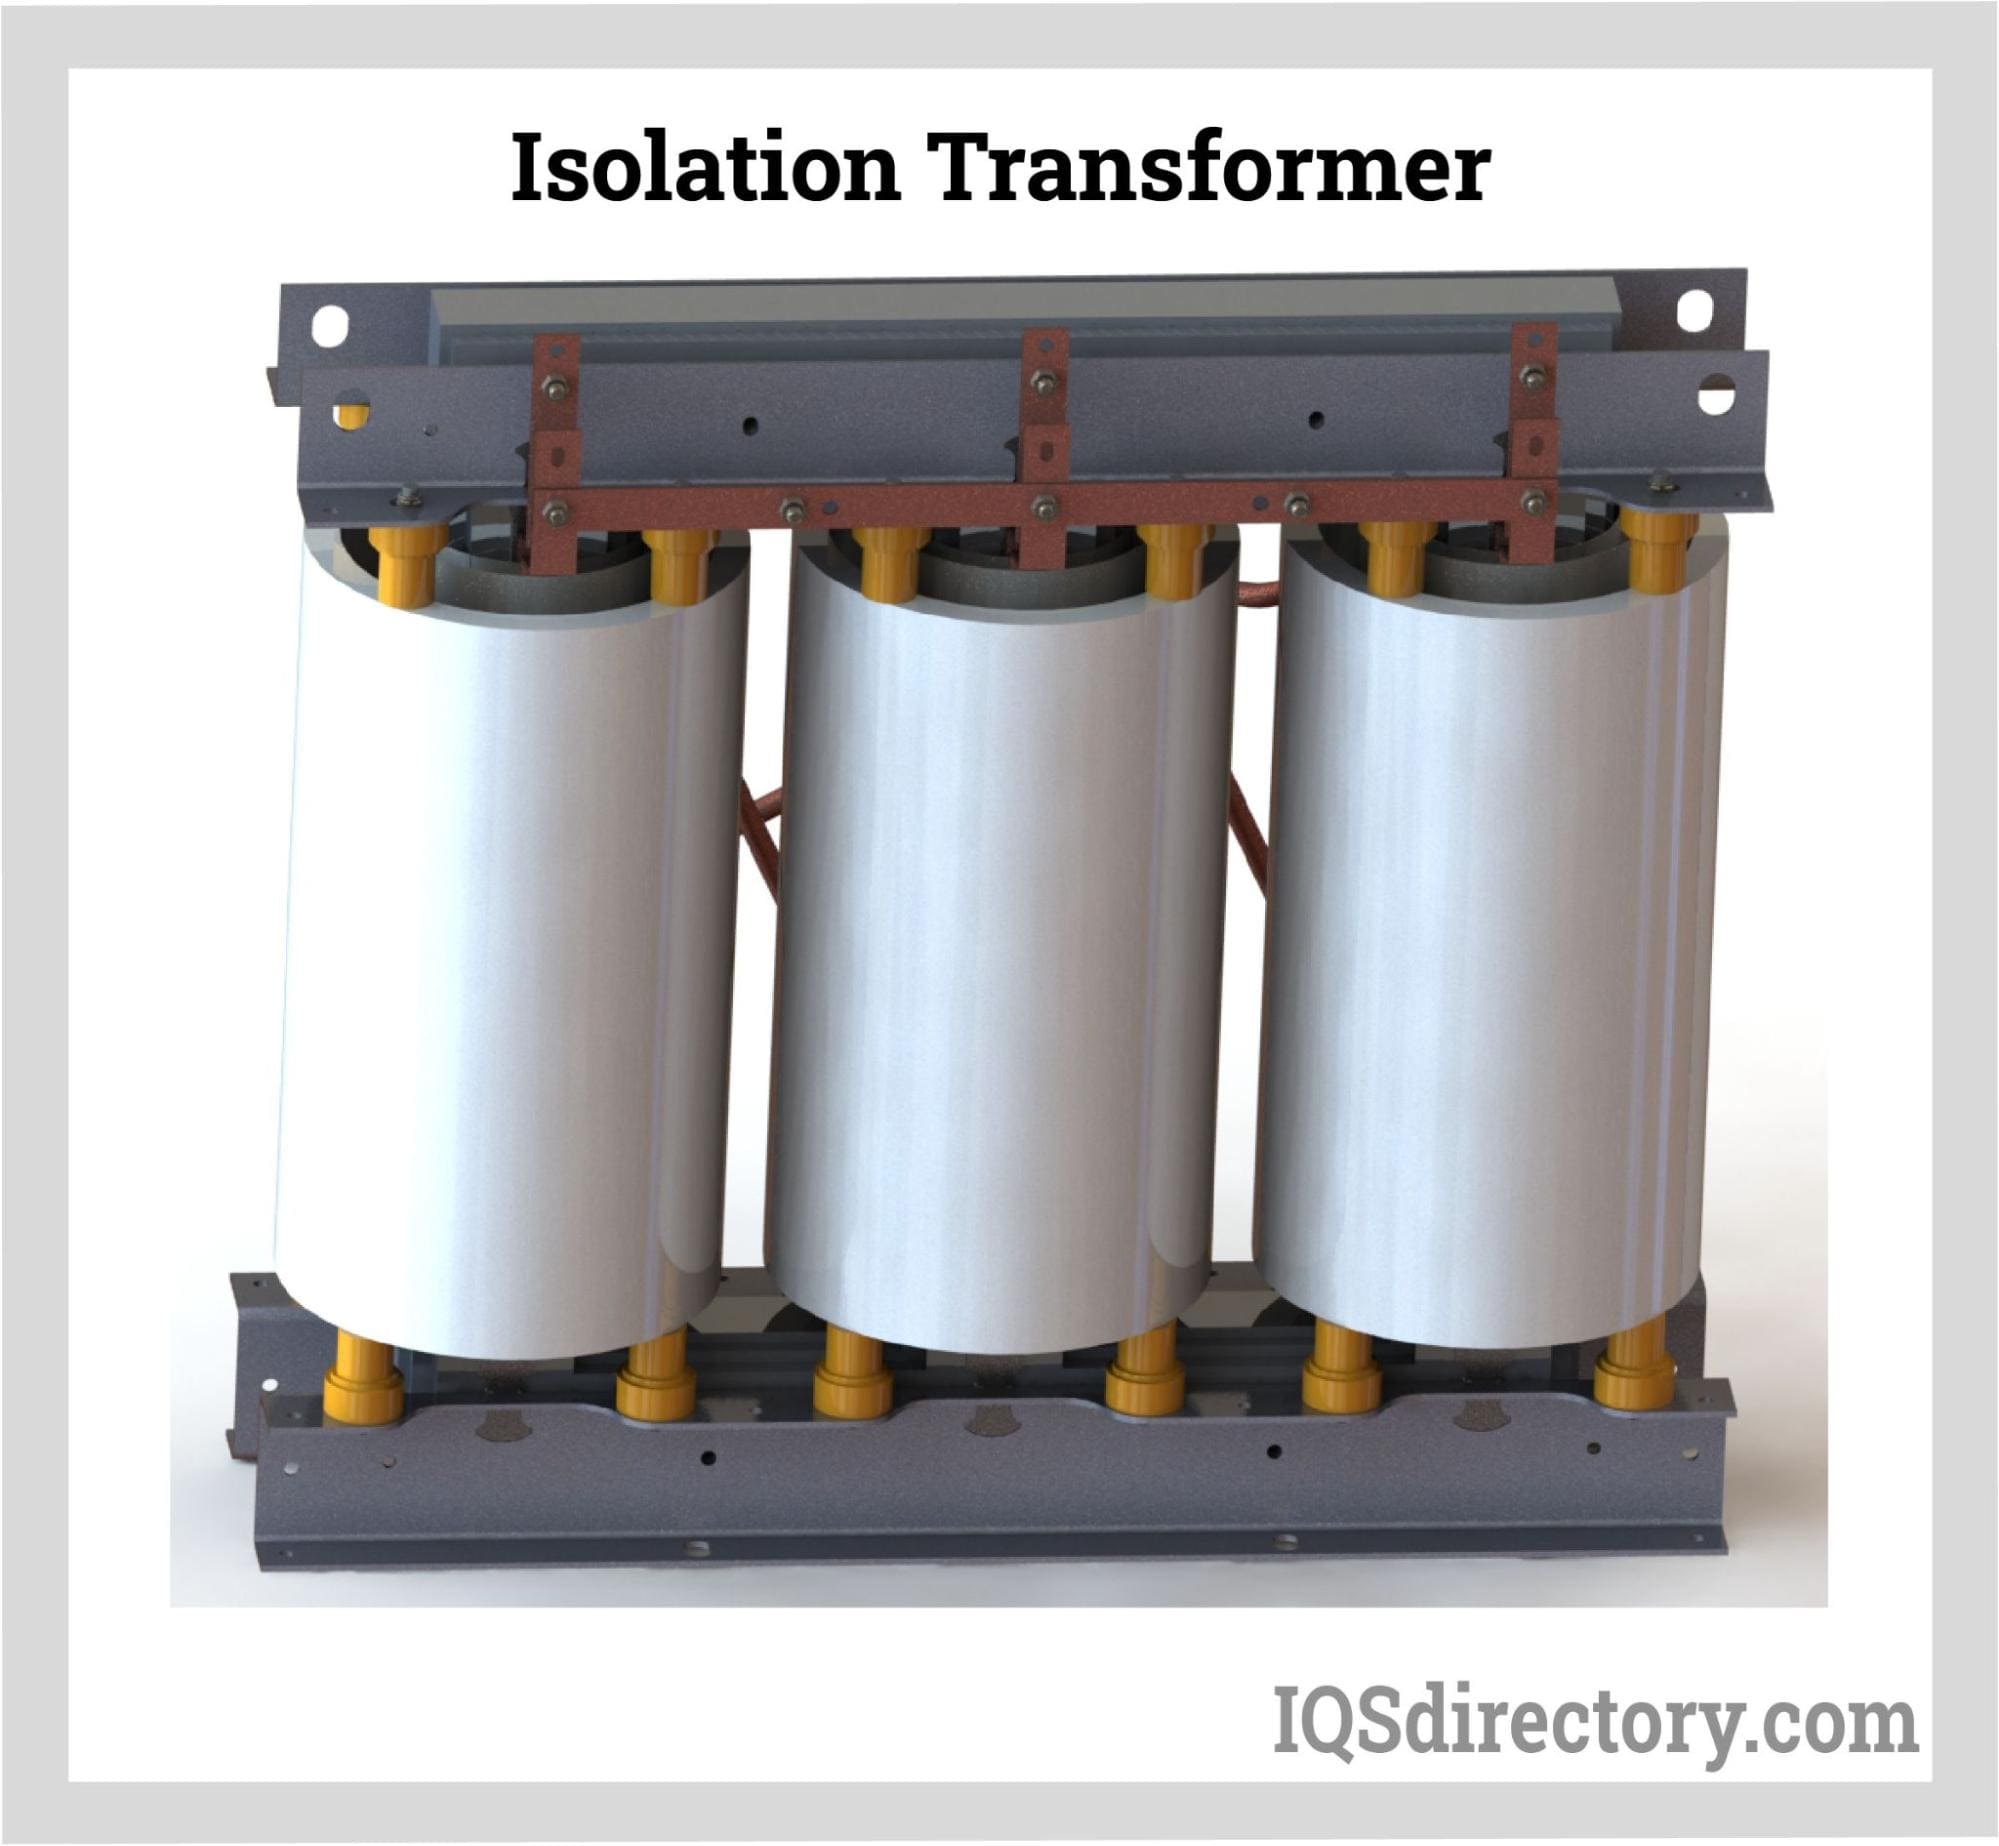 Power Transformers: Types, Uses, Features and Benefits